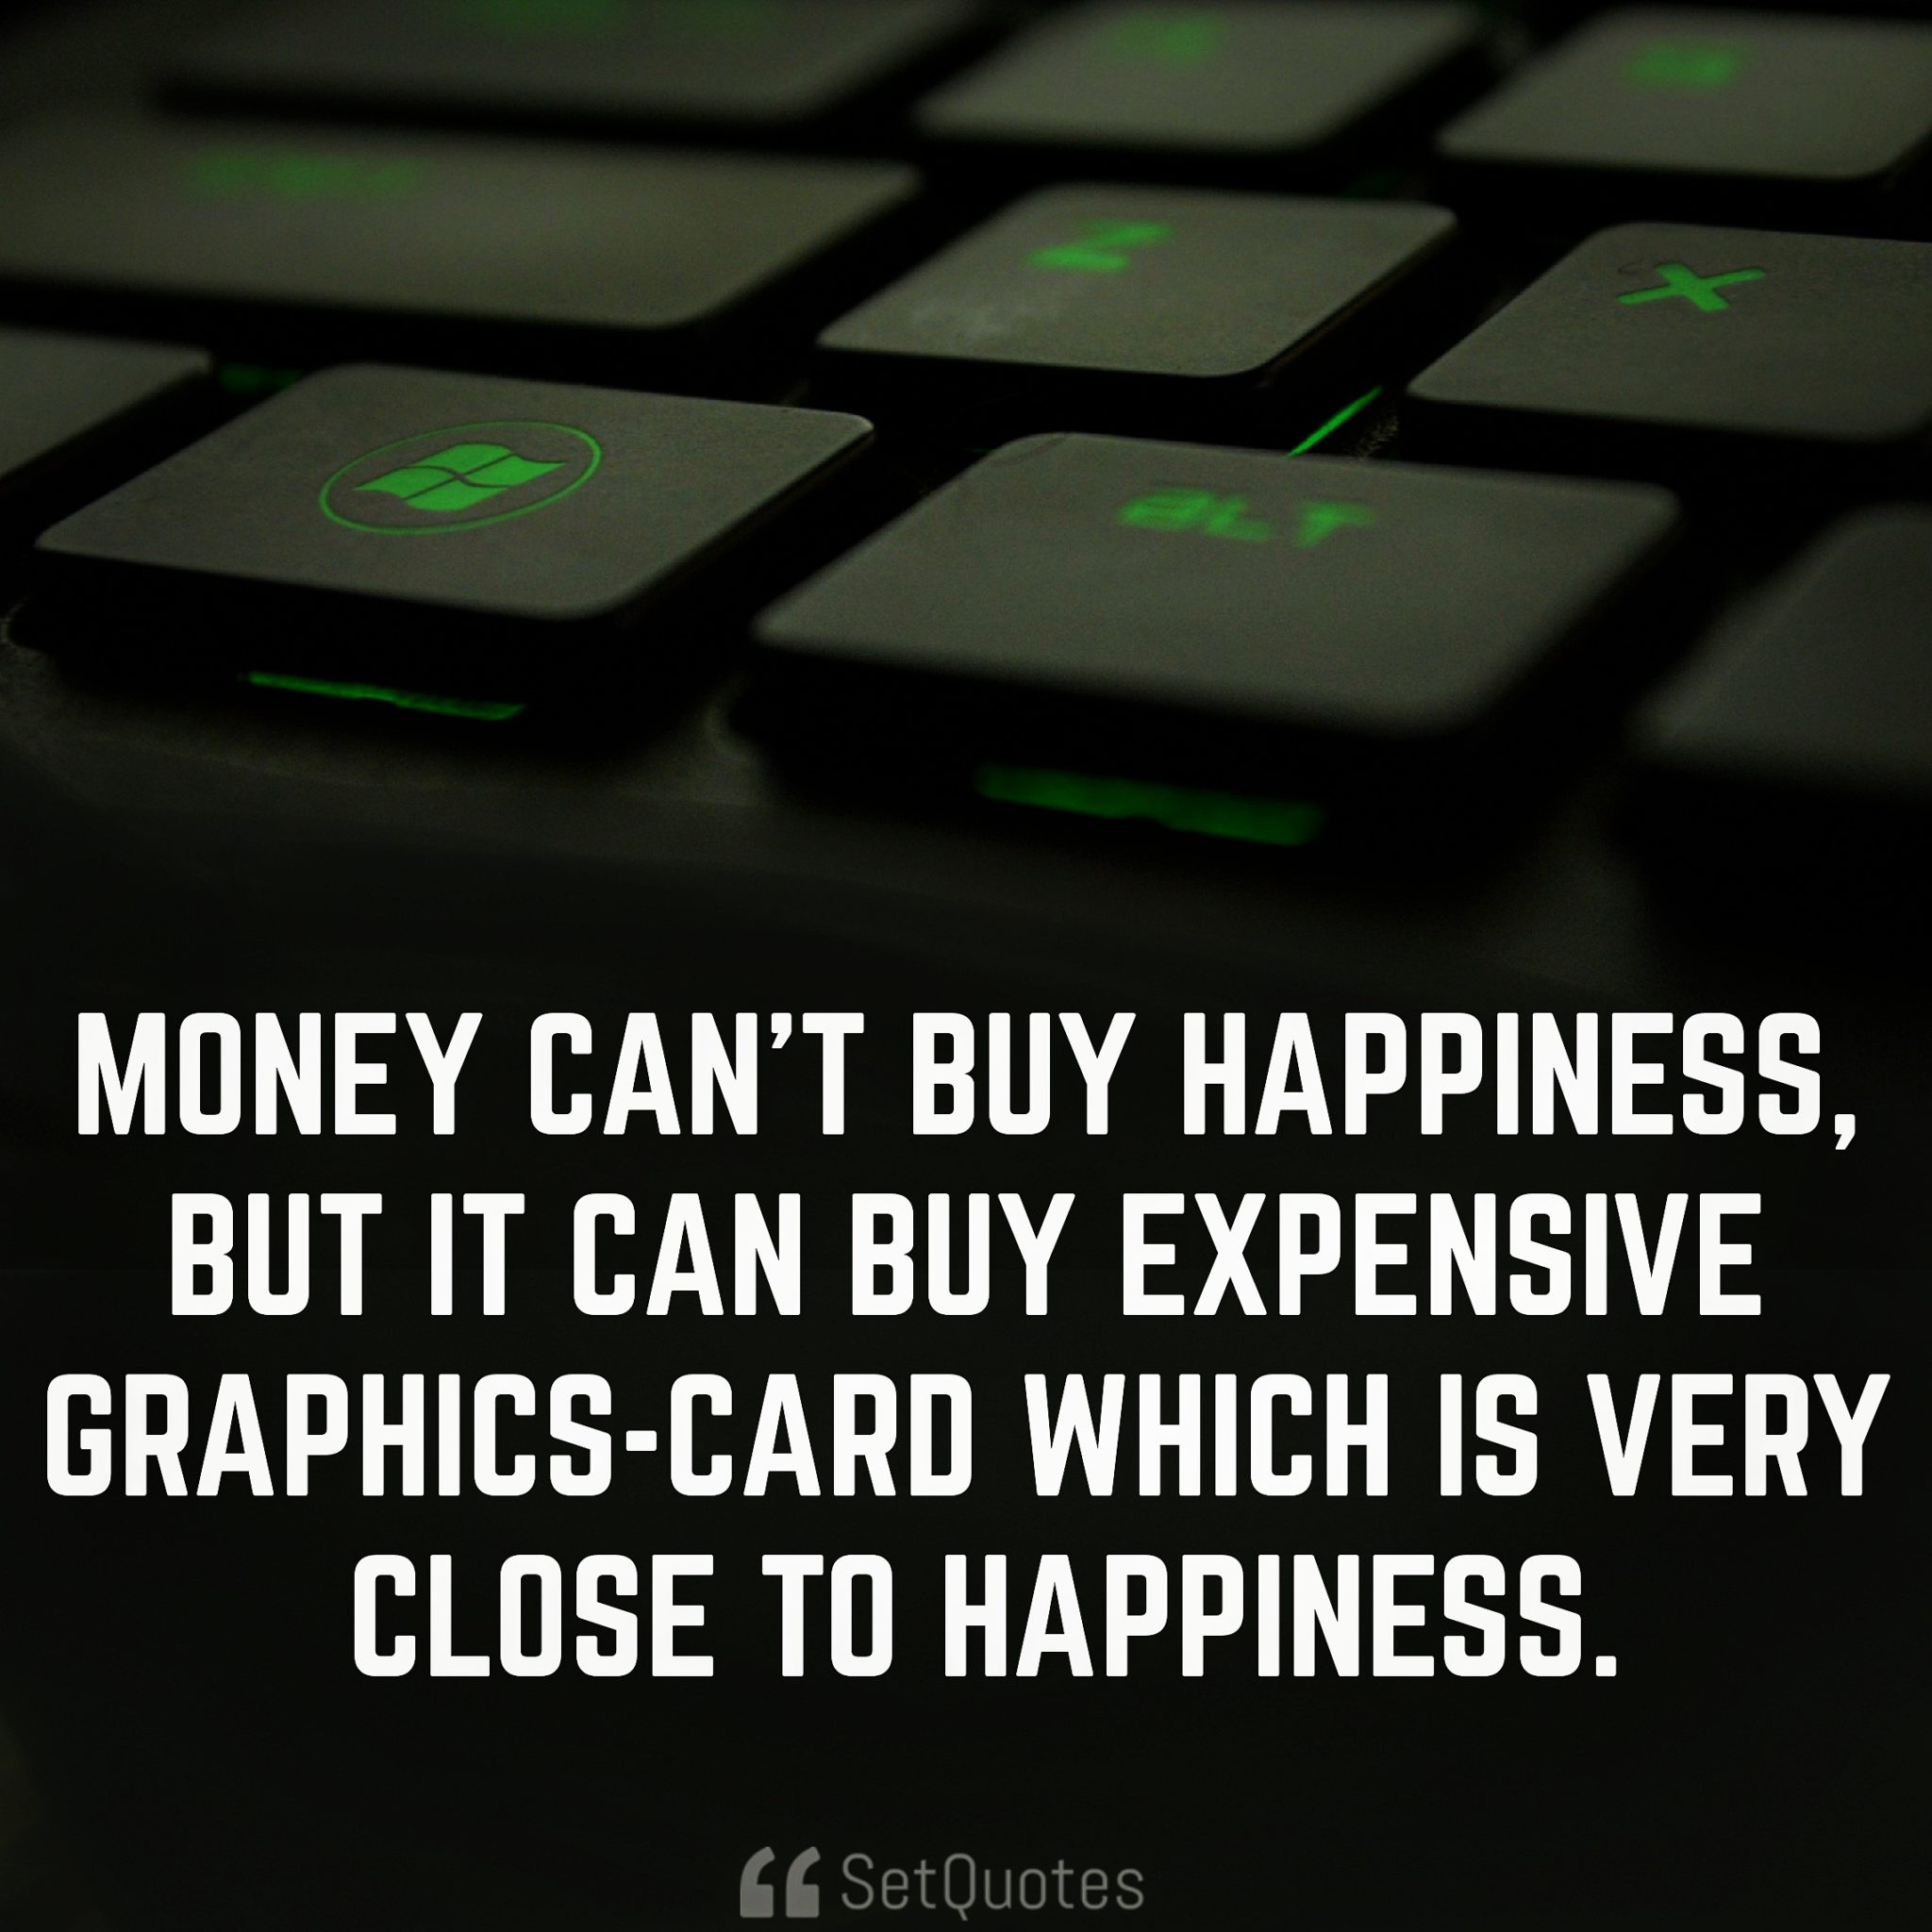 Money can’t buy happiness, but it can buy an expensive graphics-card which is very close to happiness. - Money Doesn't Buy Happiness quotes